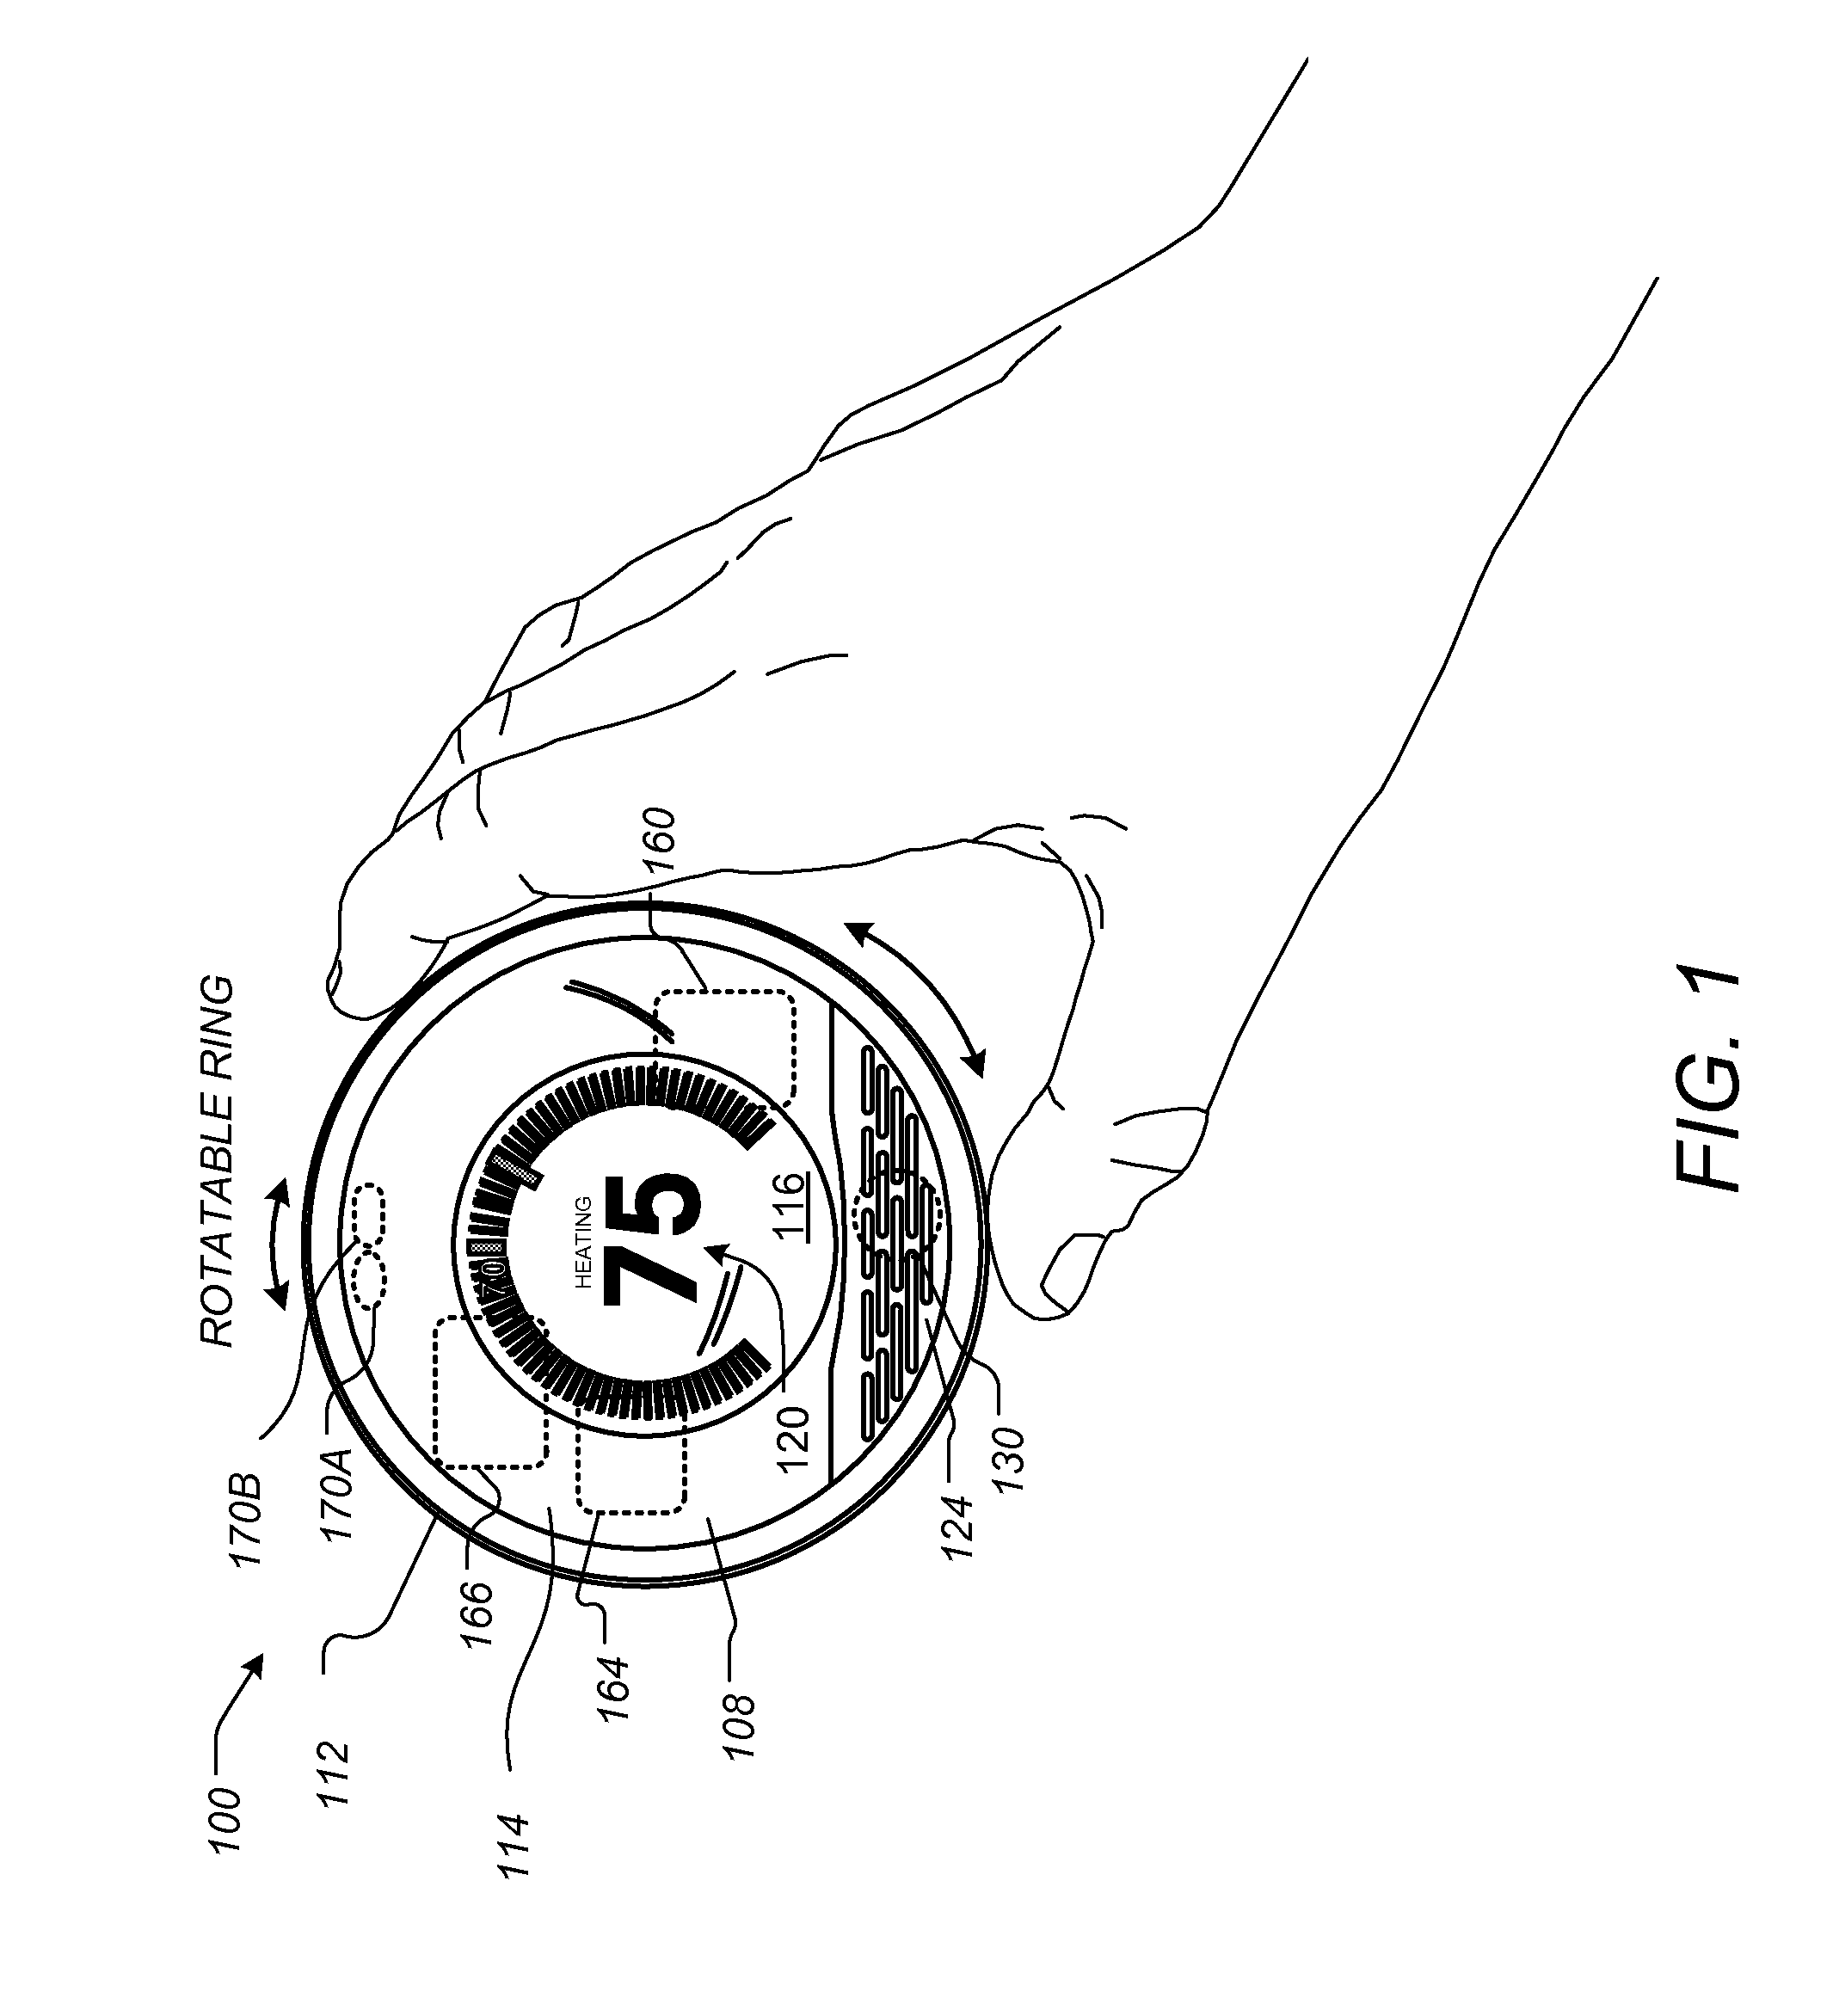 Adjusting proximity thresholds for activating a device user interface